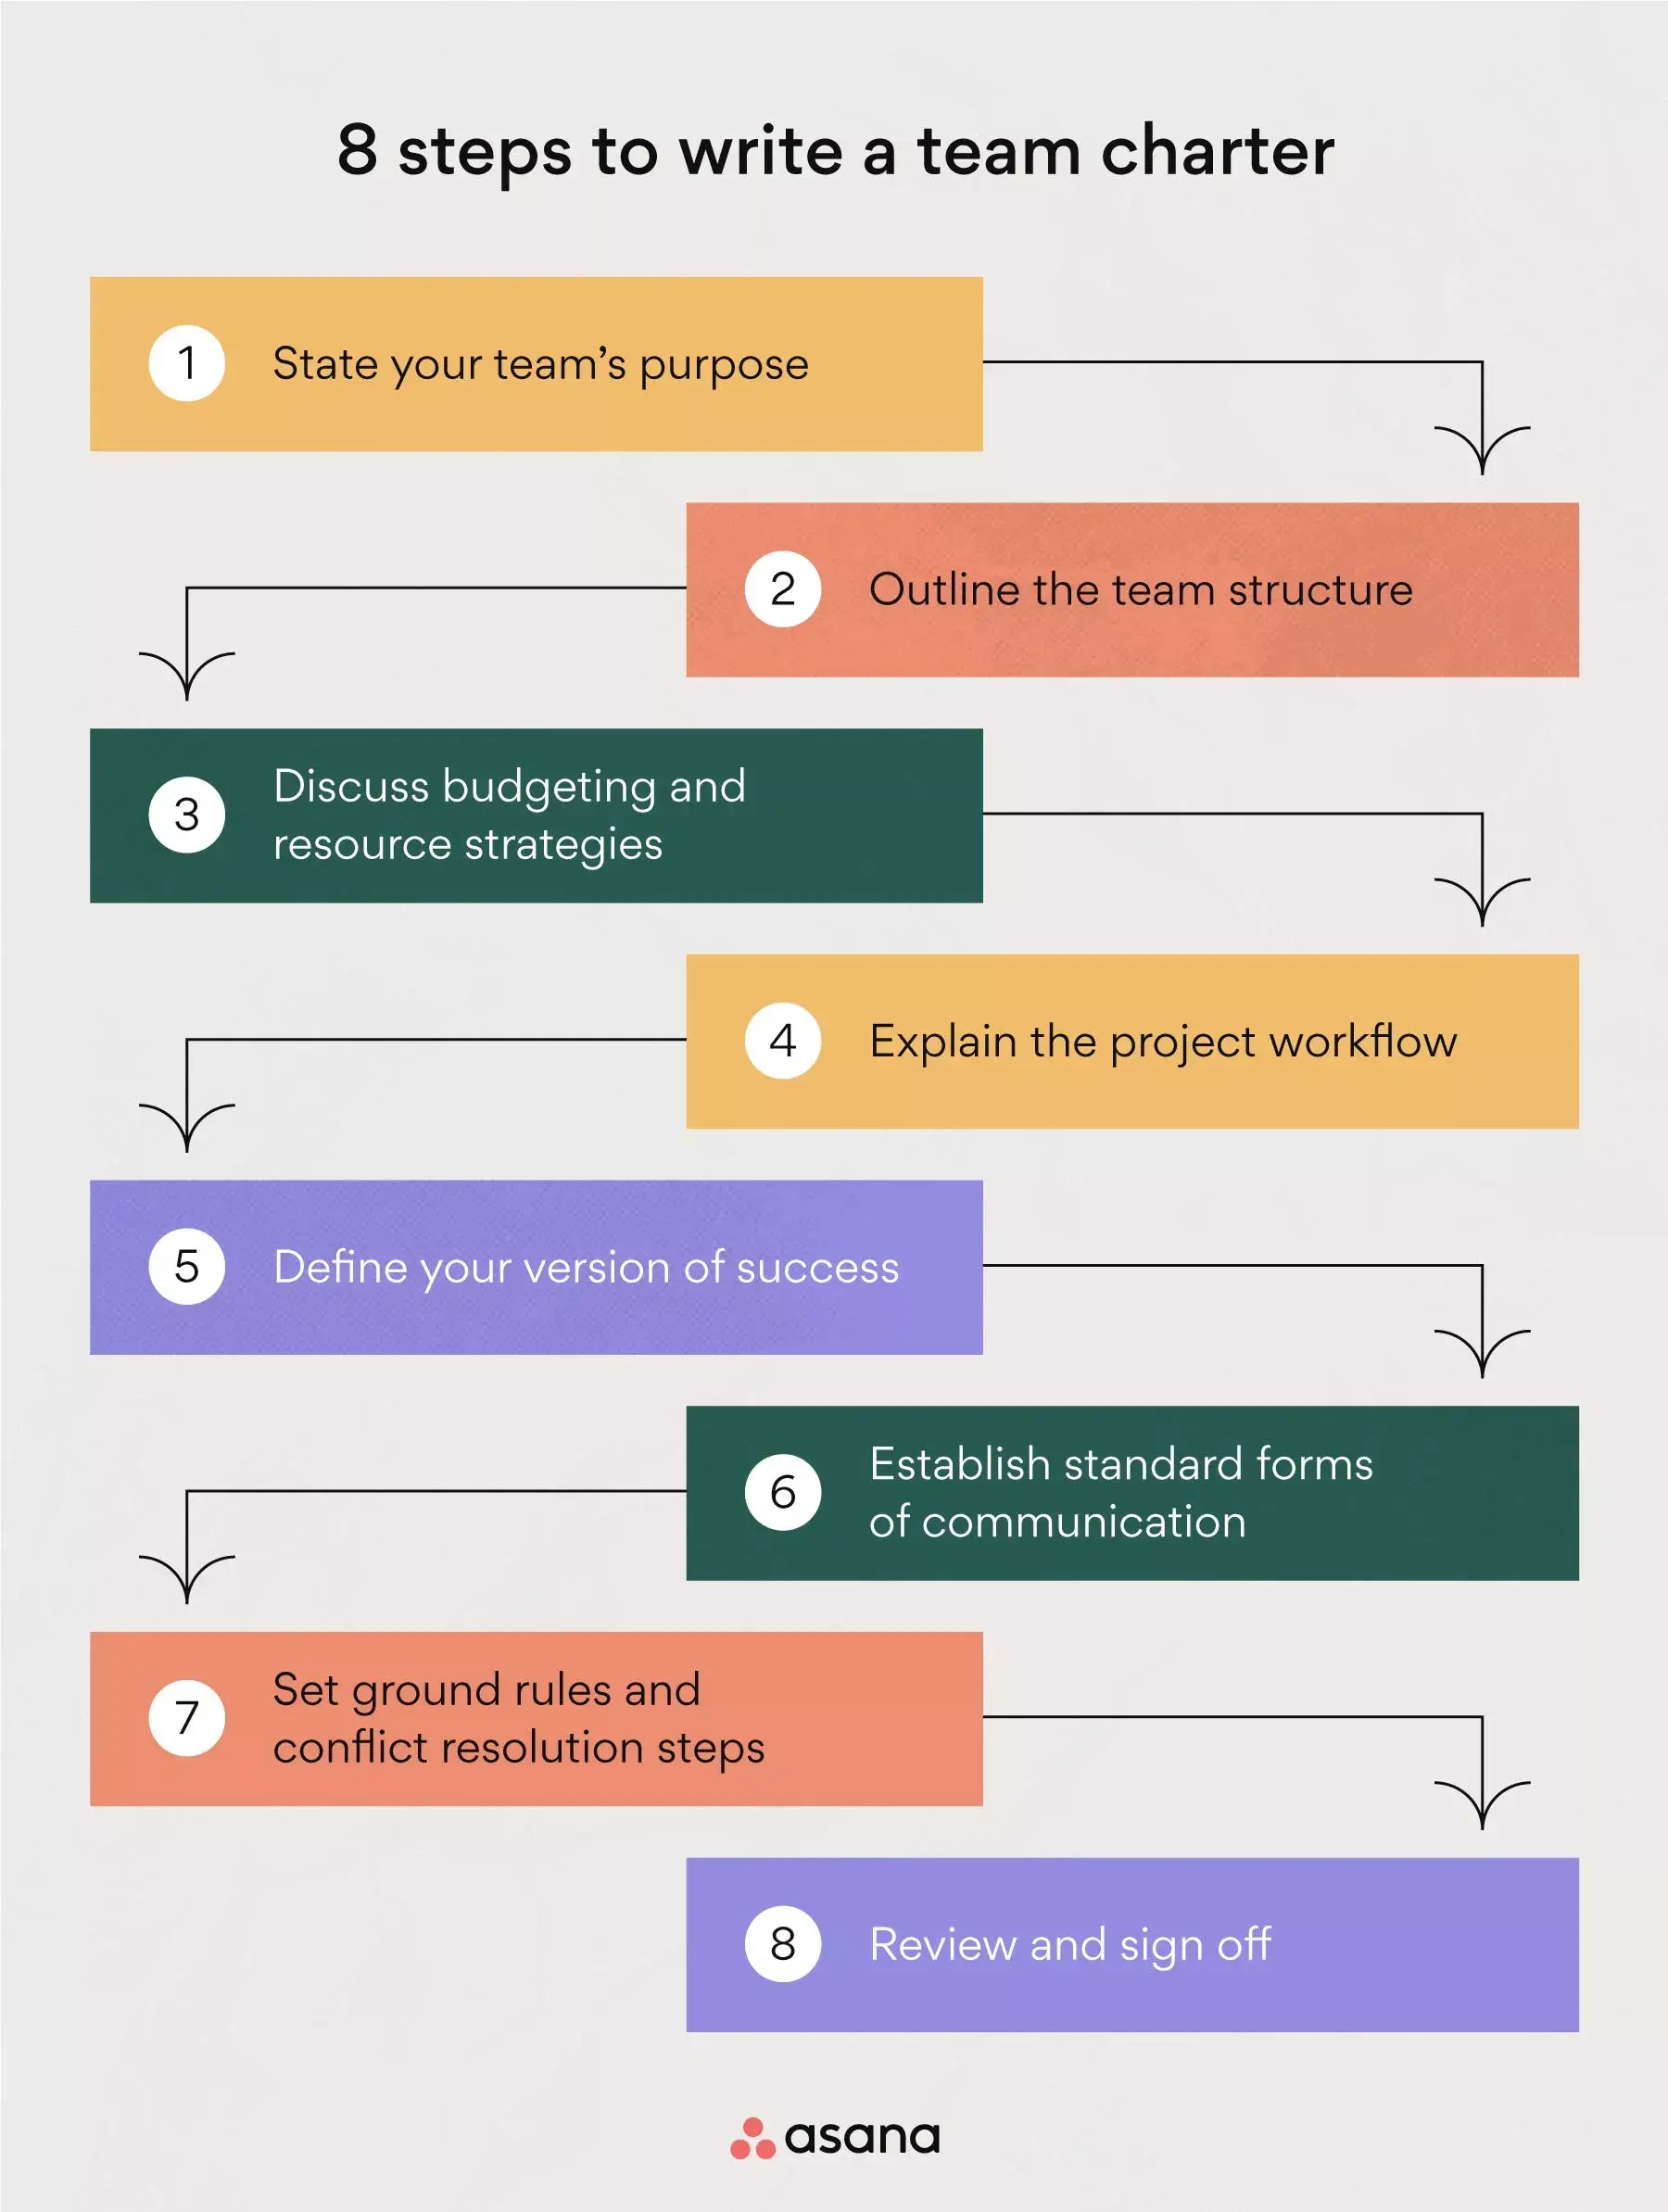 [inline illustration] 8 steps to write a team charter (infographic)